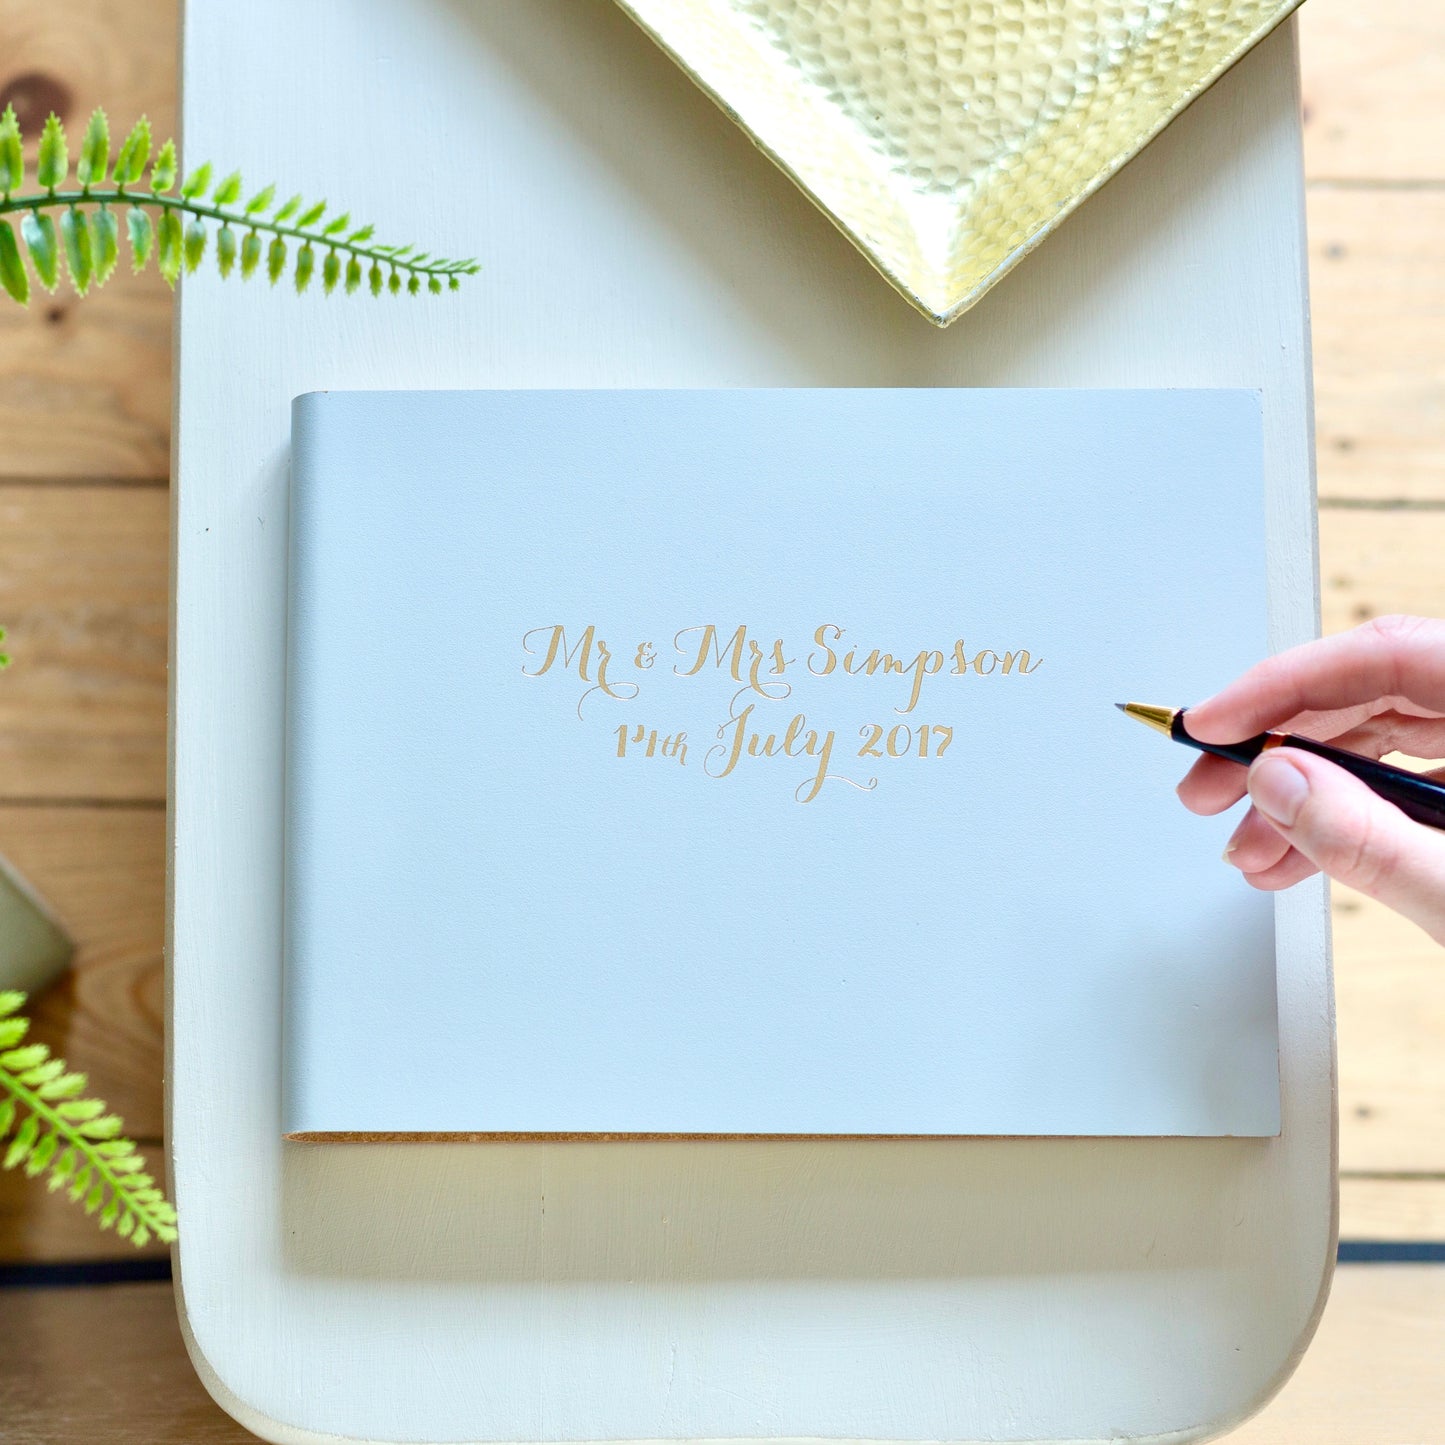 a wedding guest book is on a white table and someone has a pen in their hand poised to write a message in it. The book is grey and and has the names of thebride and groom on the front and the date of the wedding 